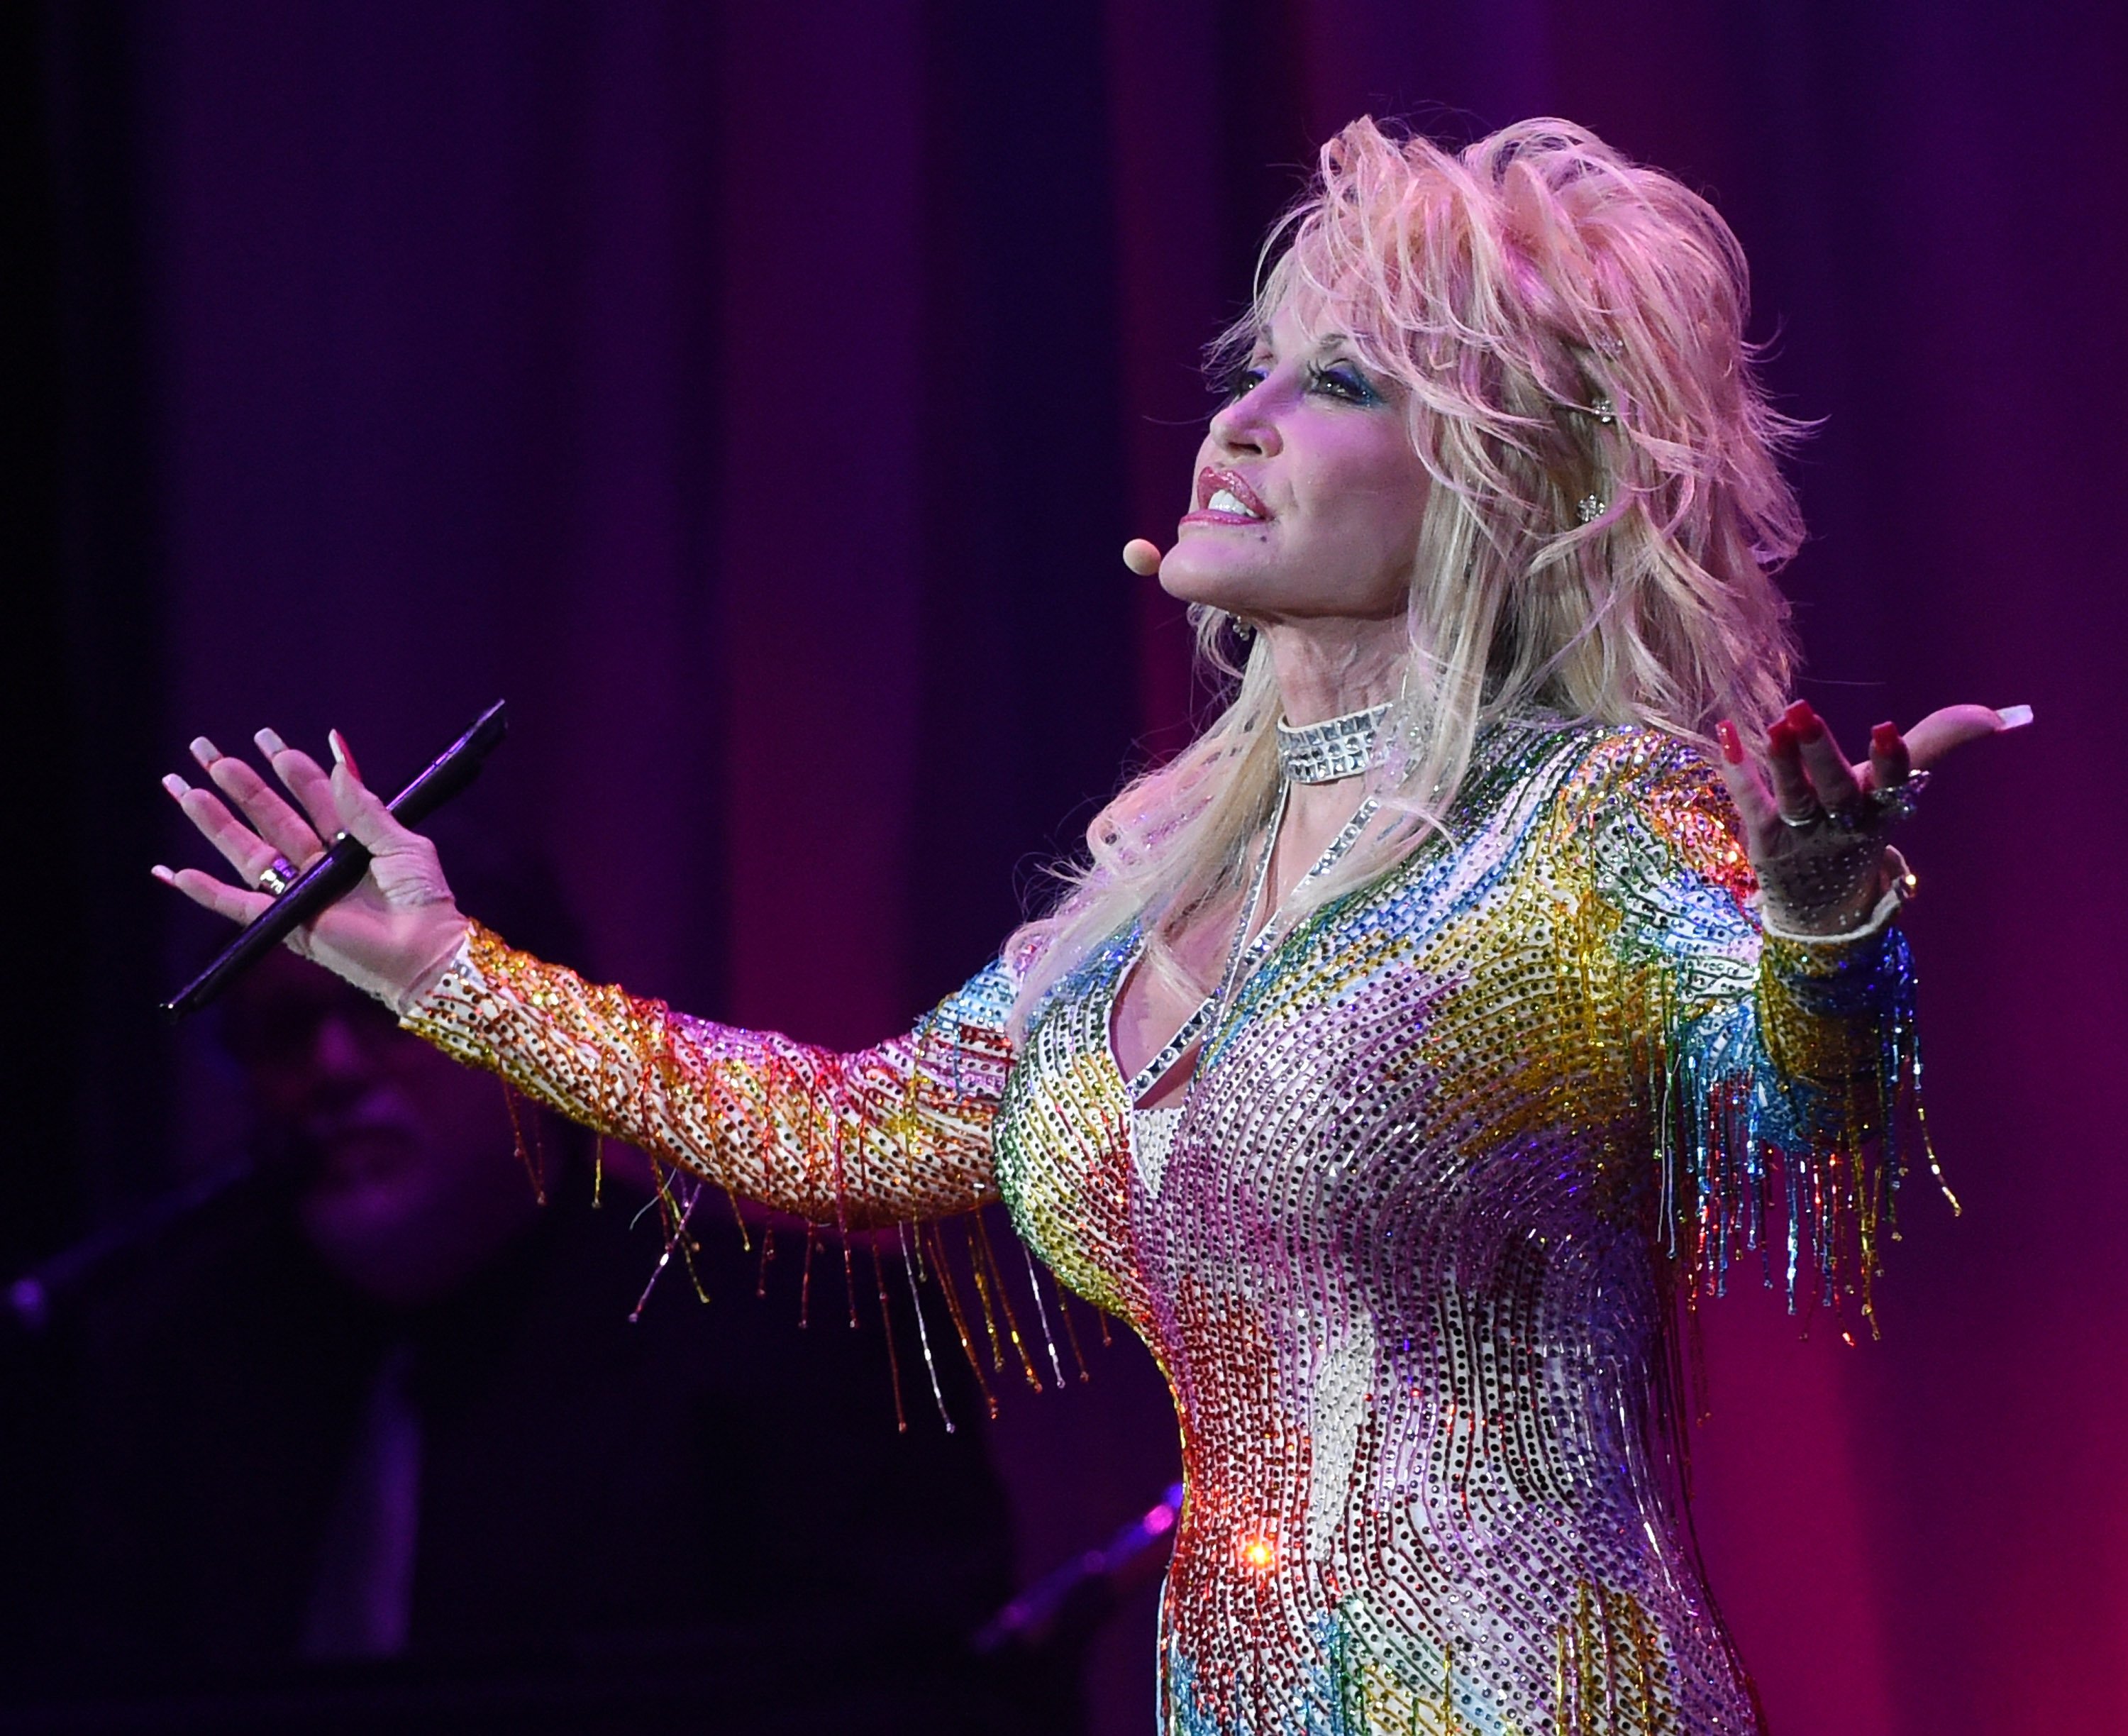 Dolly Parton performs on stage. She's wearing a rainbow, sparkly outfit.